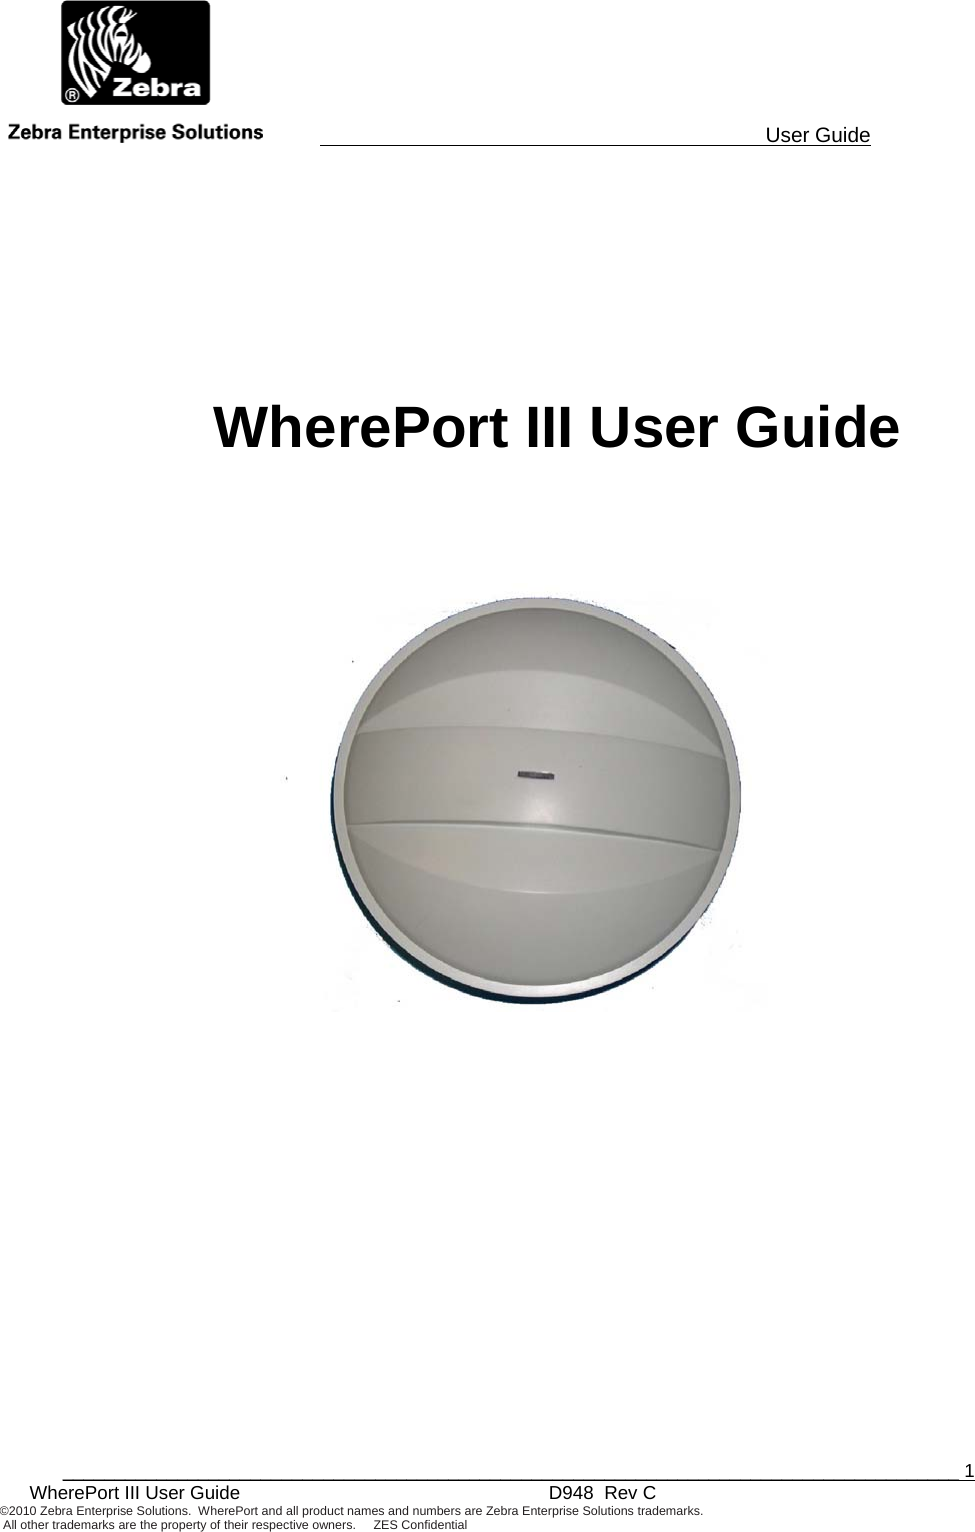                                                                                          User Guide  ______________________________________________________________________________________ 1 WherePort III User Guide    D948  Rev C ©2010 Zebra Enterprise Solutions.  WherePort and all product names and numbers are Zebra Enterprise Solutions trademarks.  All other trademarks are the property of their respective owners.     ZES Confidential       WherePort III User Guide      